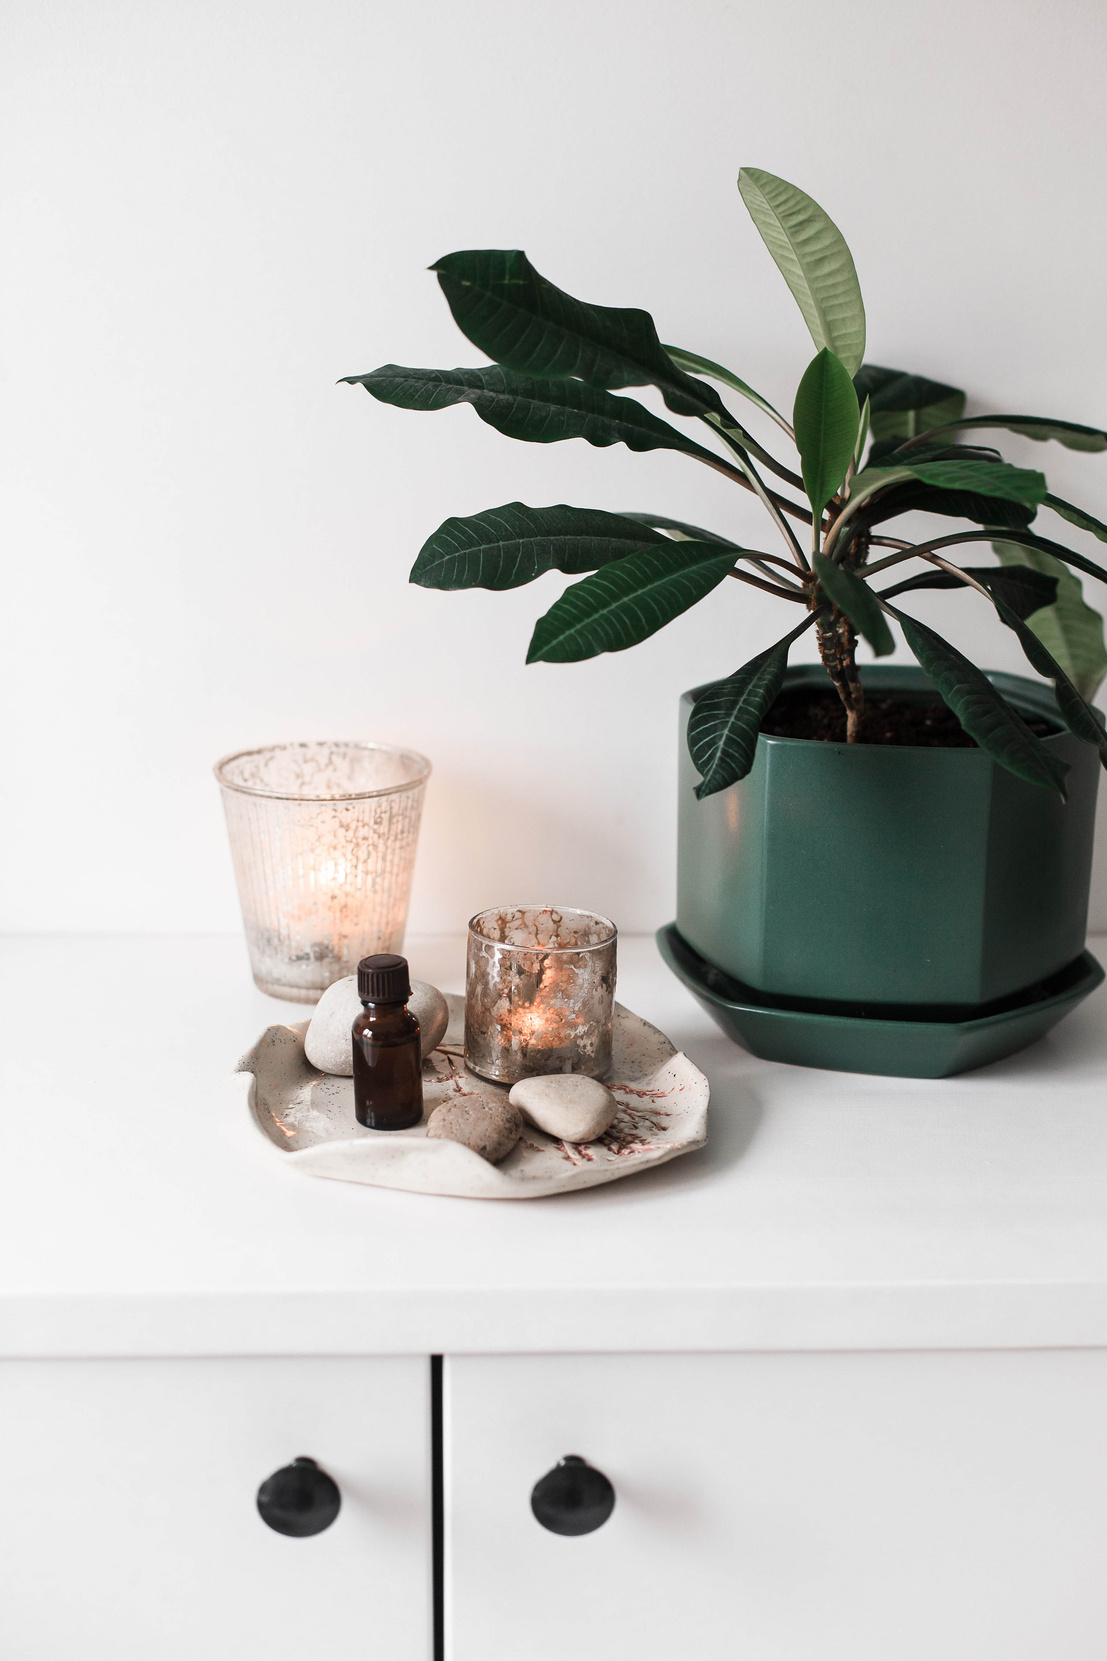 Composition of Bottle, Candles and Rocks Near a Houseplant